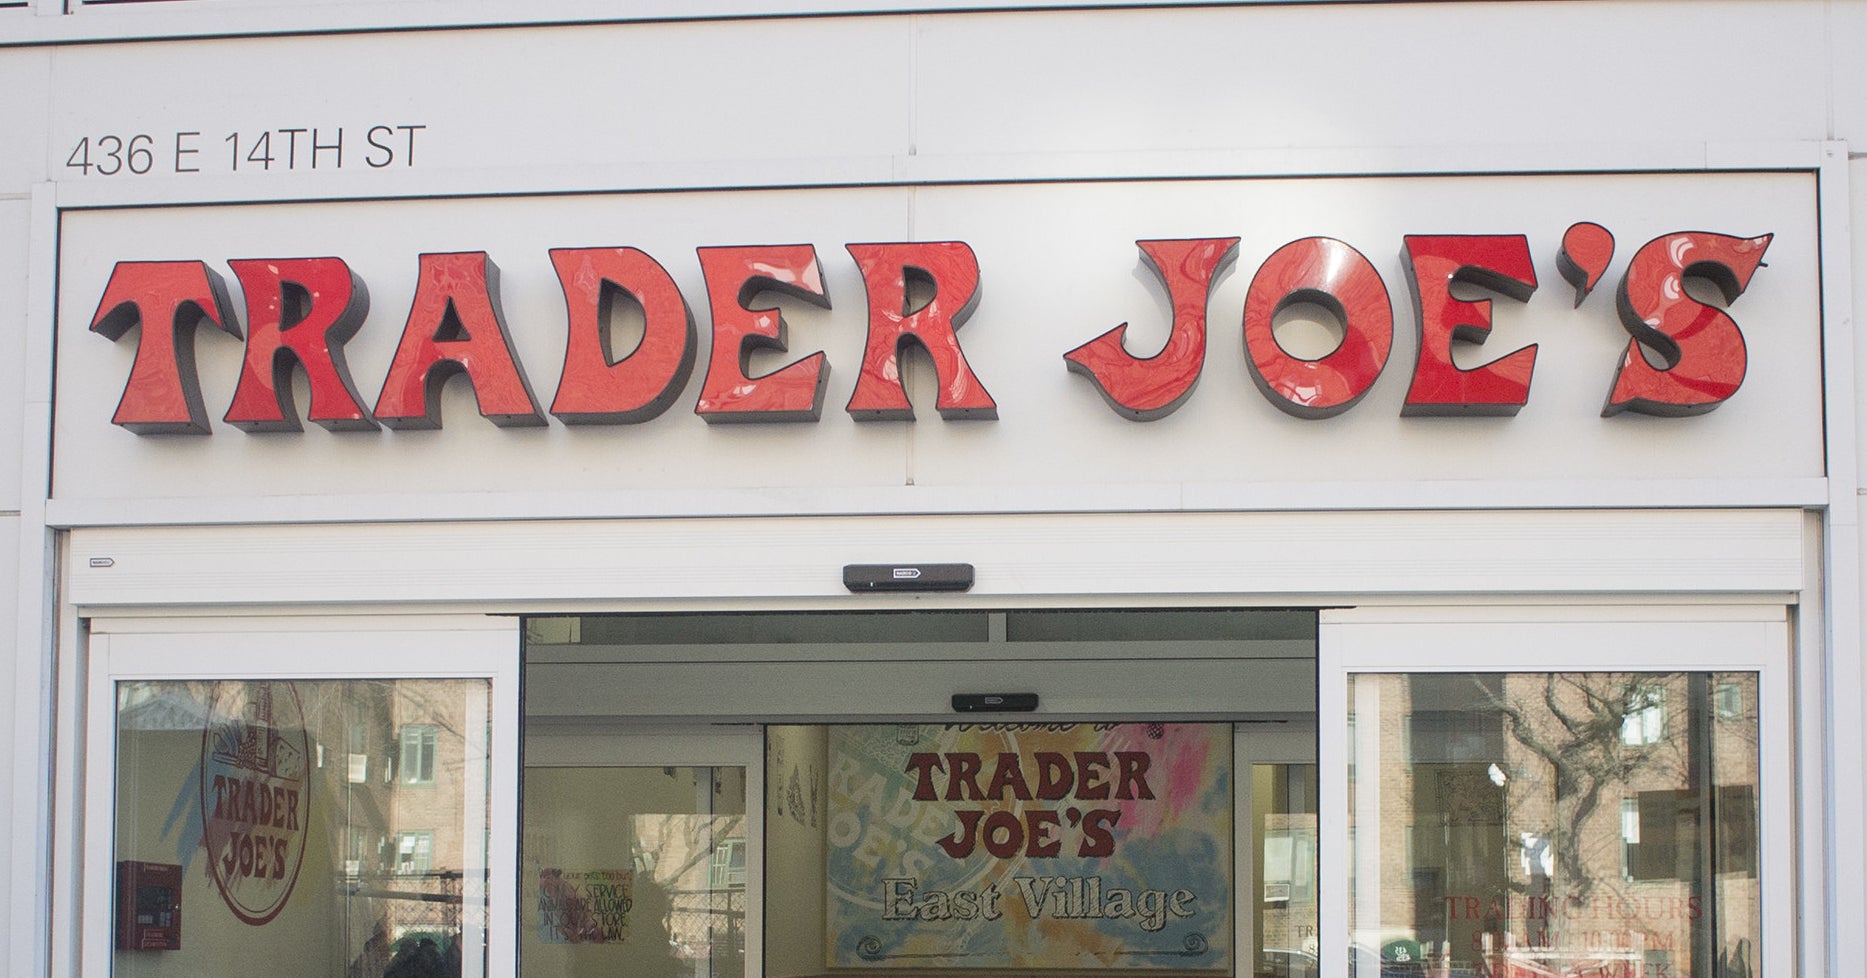 Employee of a trader Joe says he has been fired for seeking better protection for COVID-19